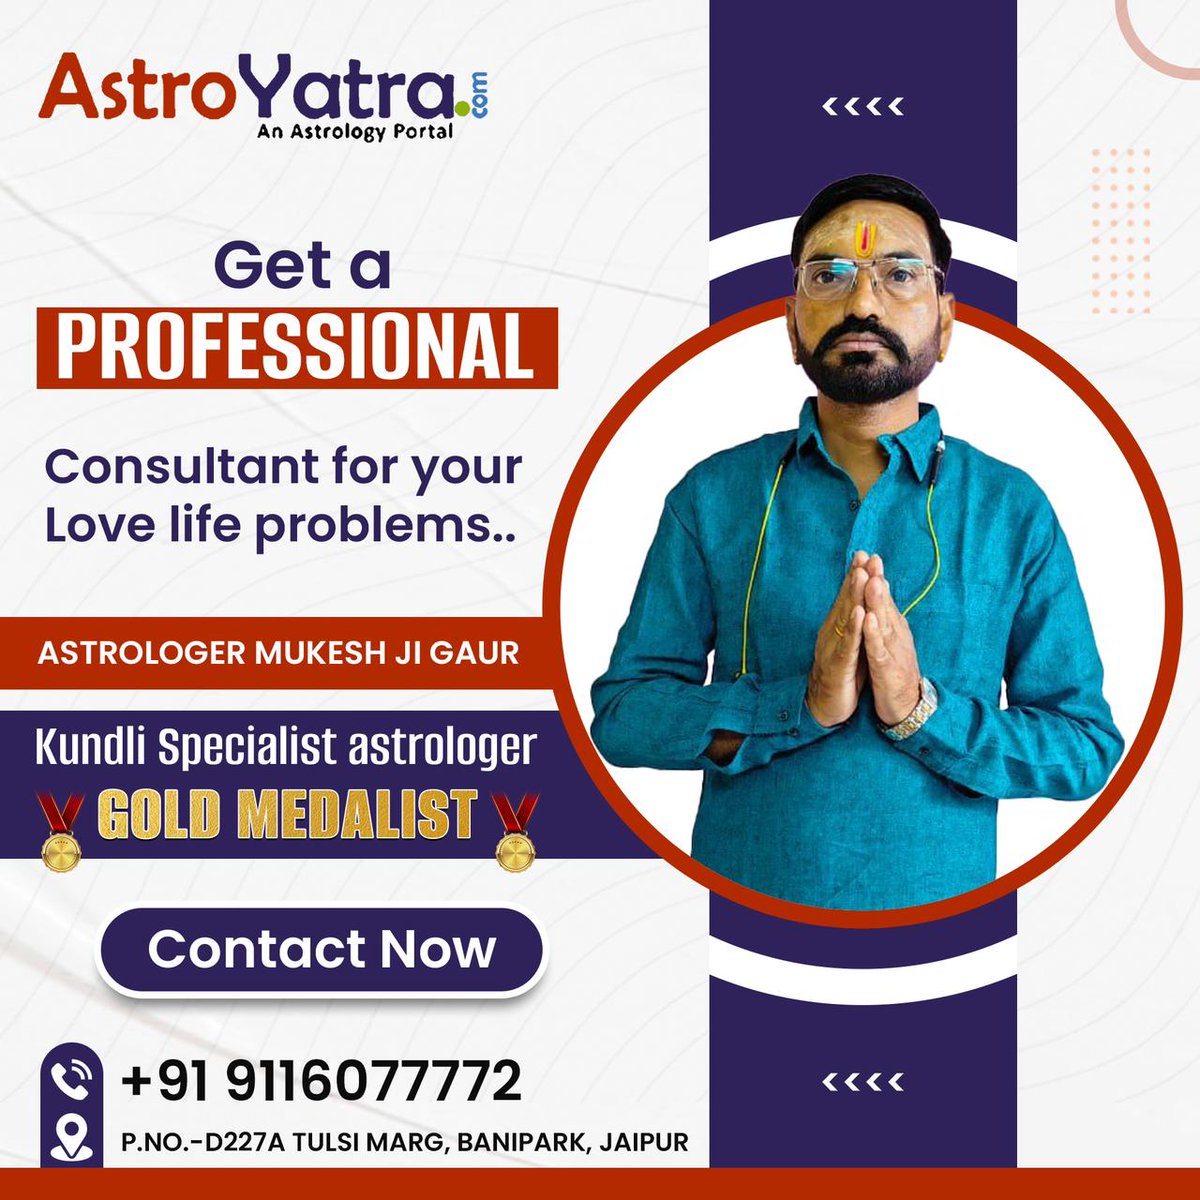 Get a professional consultant for love love life & love relationship call +91-98294-52307 whatsup +91-873-99999-12
#loverelationshiplife #lovemarriageproblems #astrologypredictions #astrologer #marriagegoals #love #lovegoals #relationshipgoals #lovebreakup #vashikaran